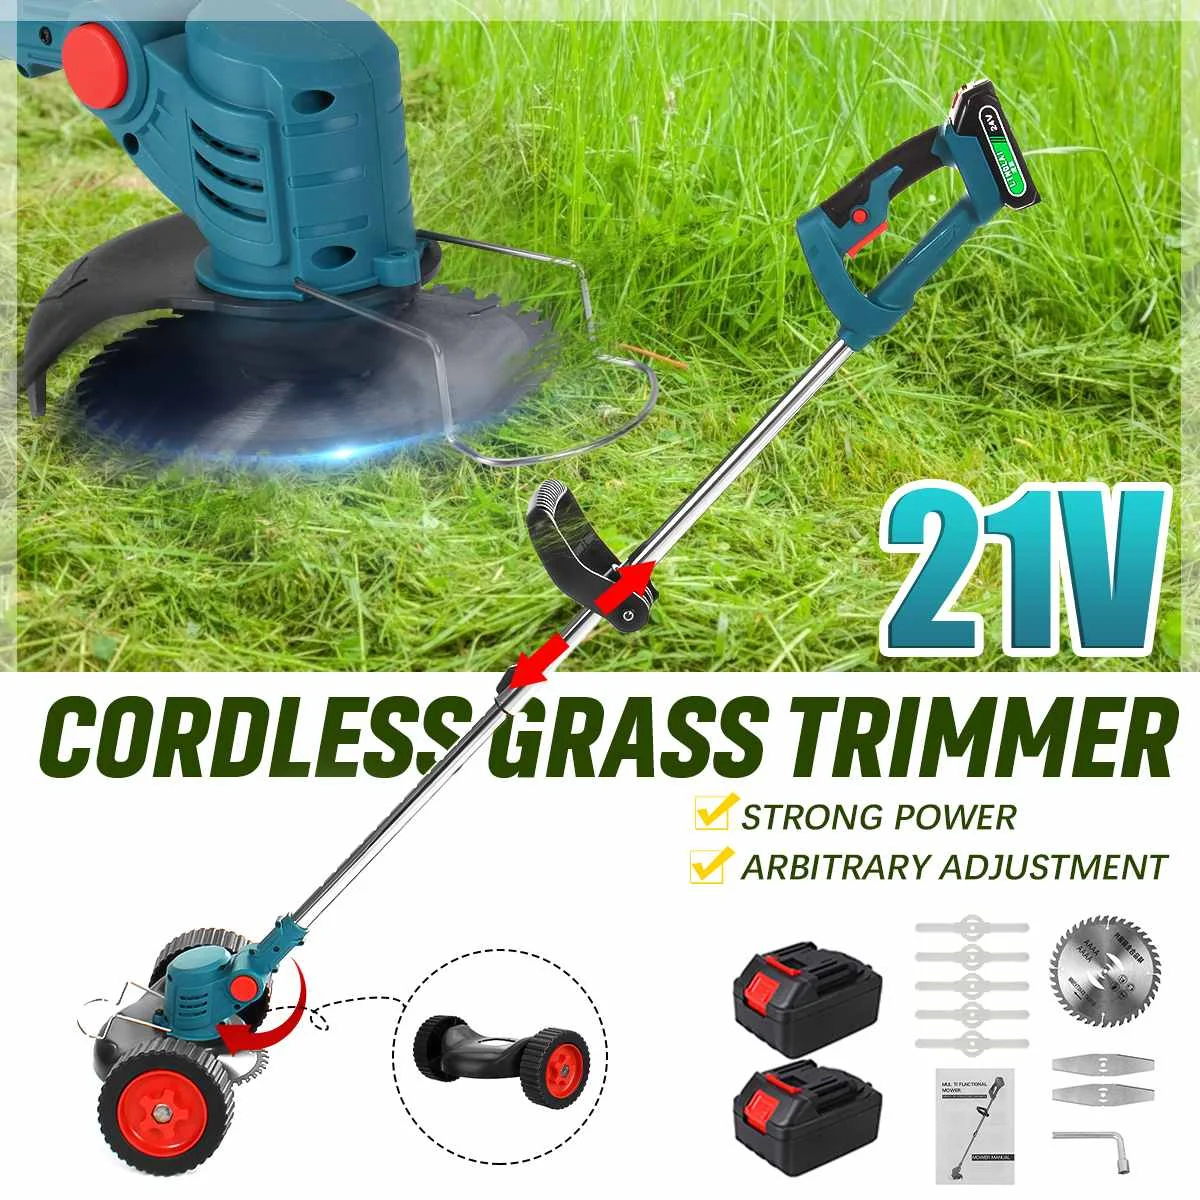 450W Electric Grass Trimmer Cordless Power Lawn Mower Hedge Trimmer Length Adjustable Garden Pruning Tool With 15000MAH Battery